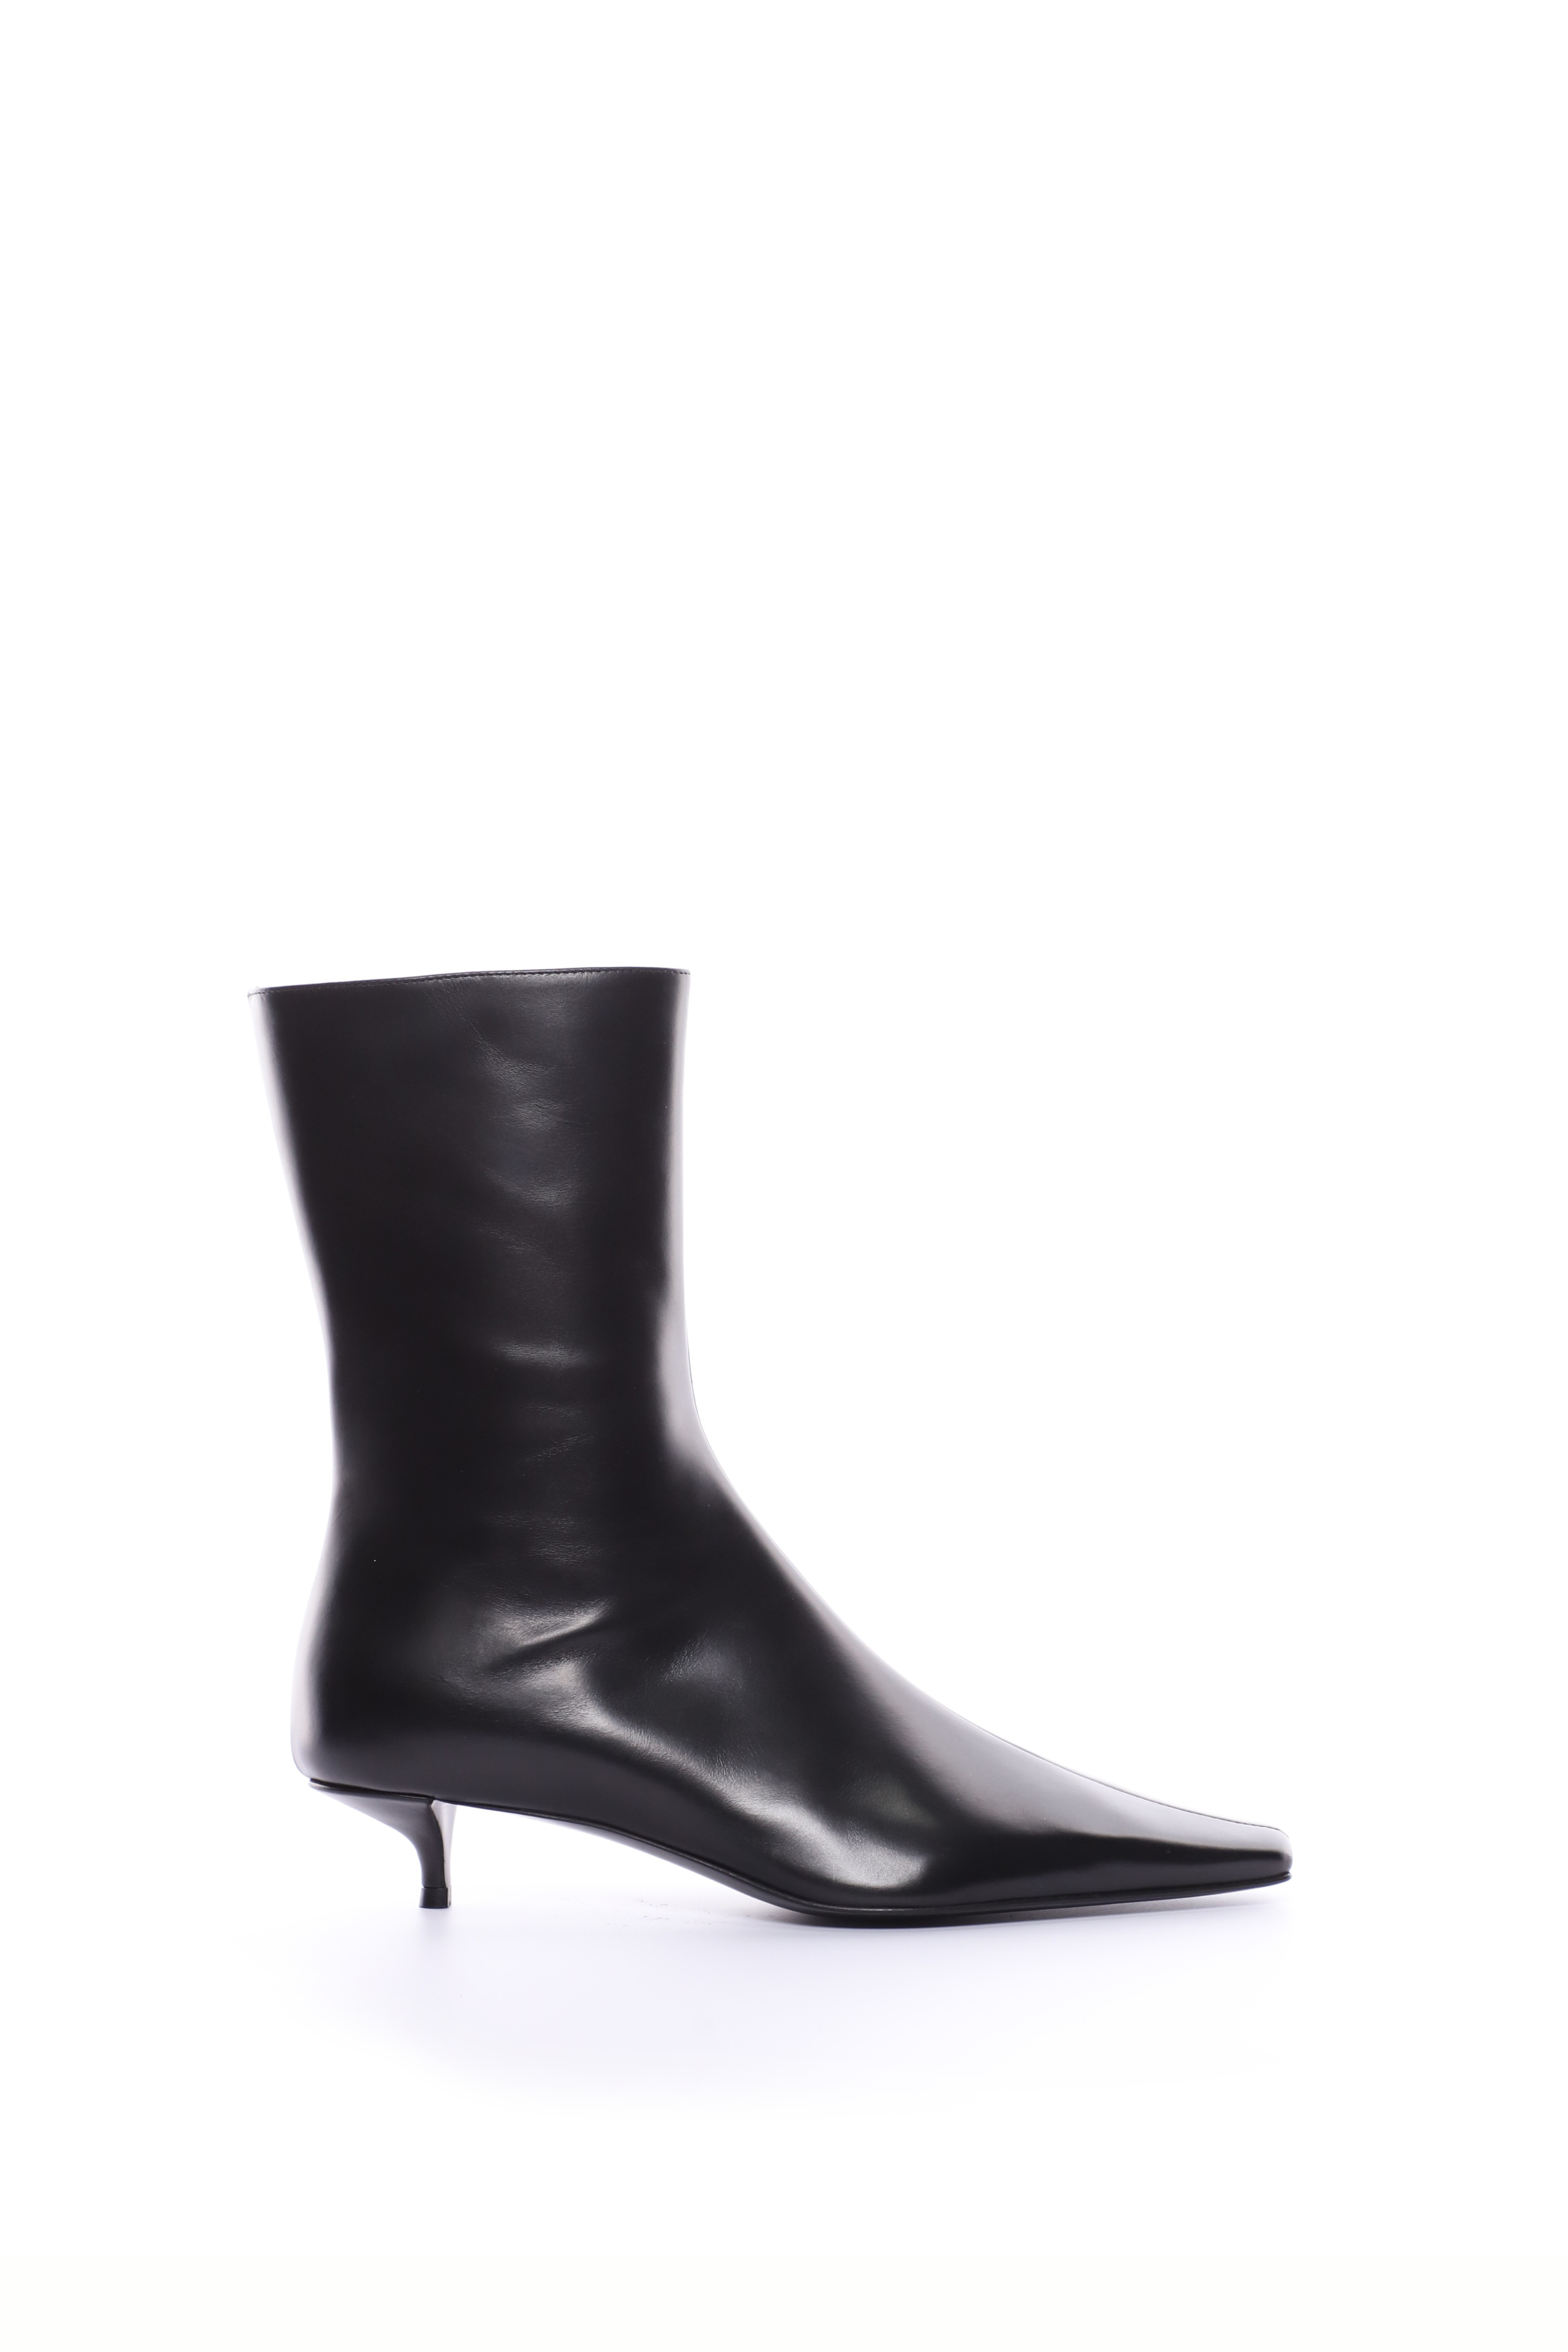 THE ROW Shrimpton Leather Boots